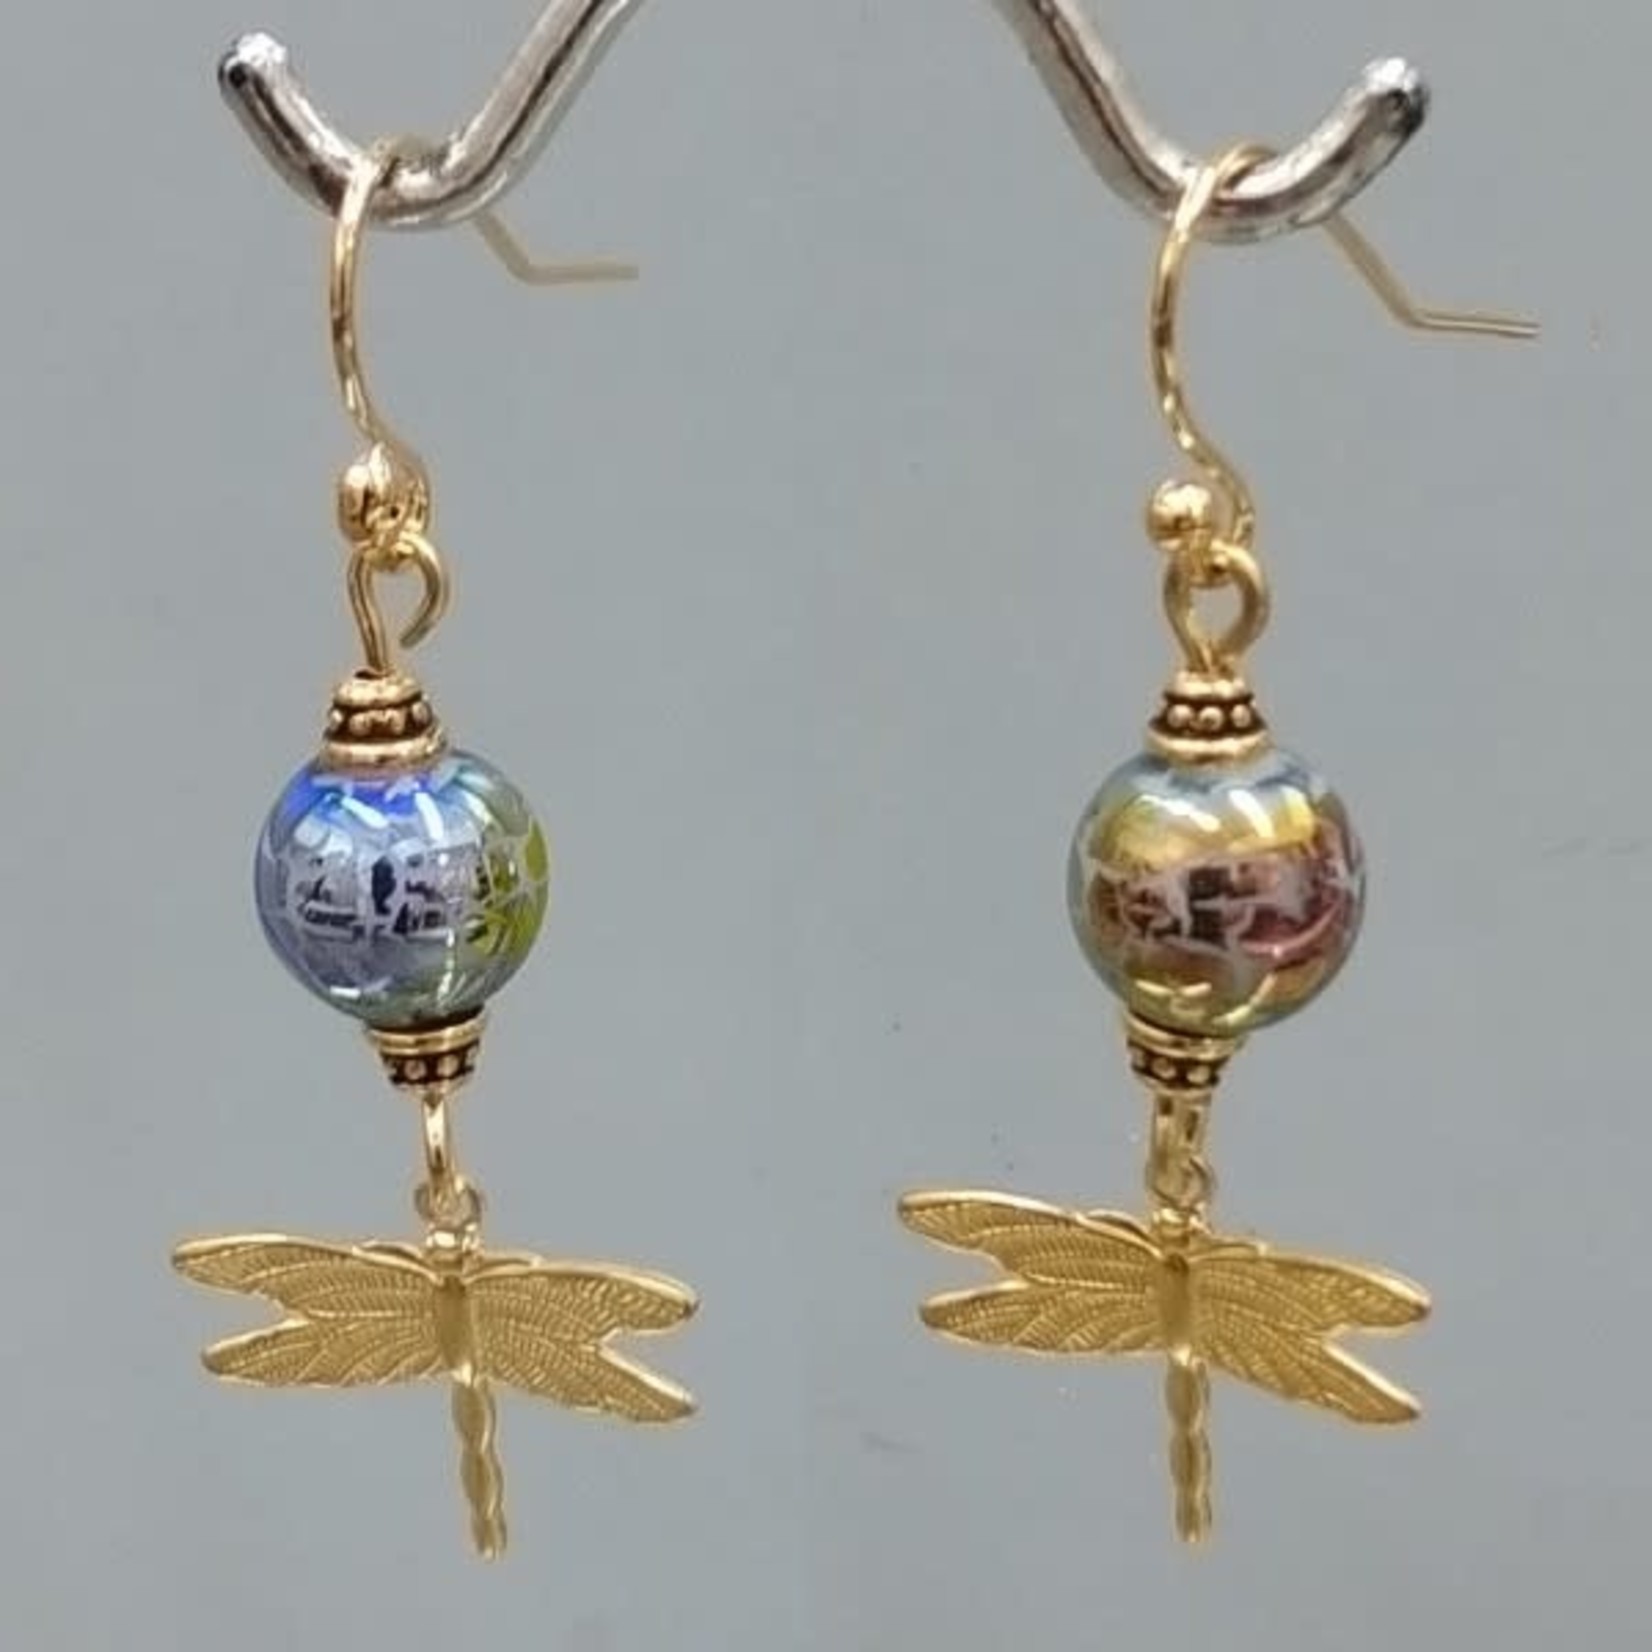 Bead Inspirations Cracked Rainbow Dragonfly Earrings - Ready to Wear